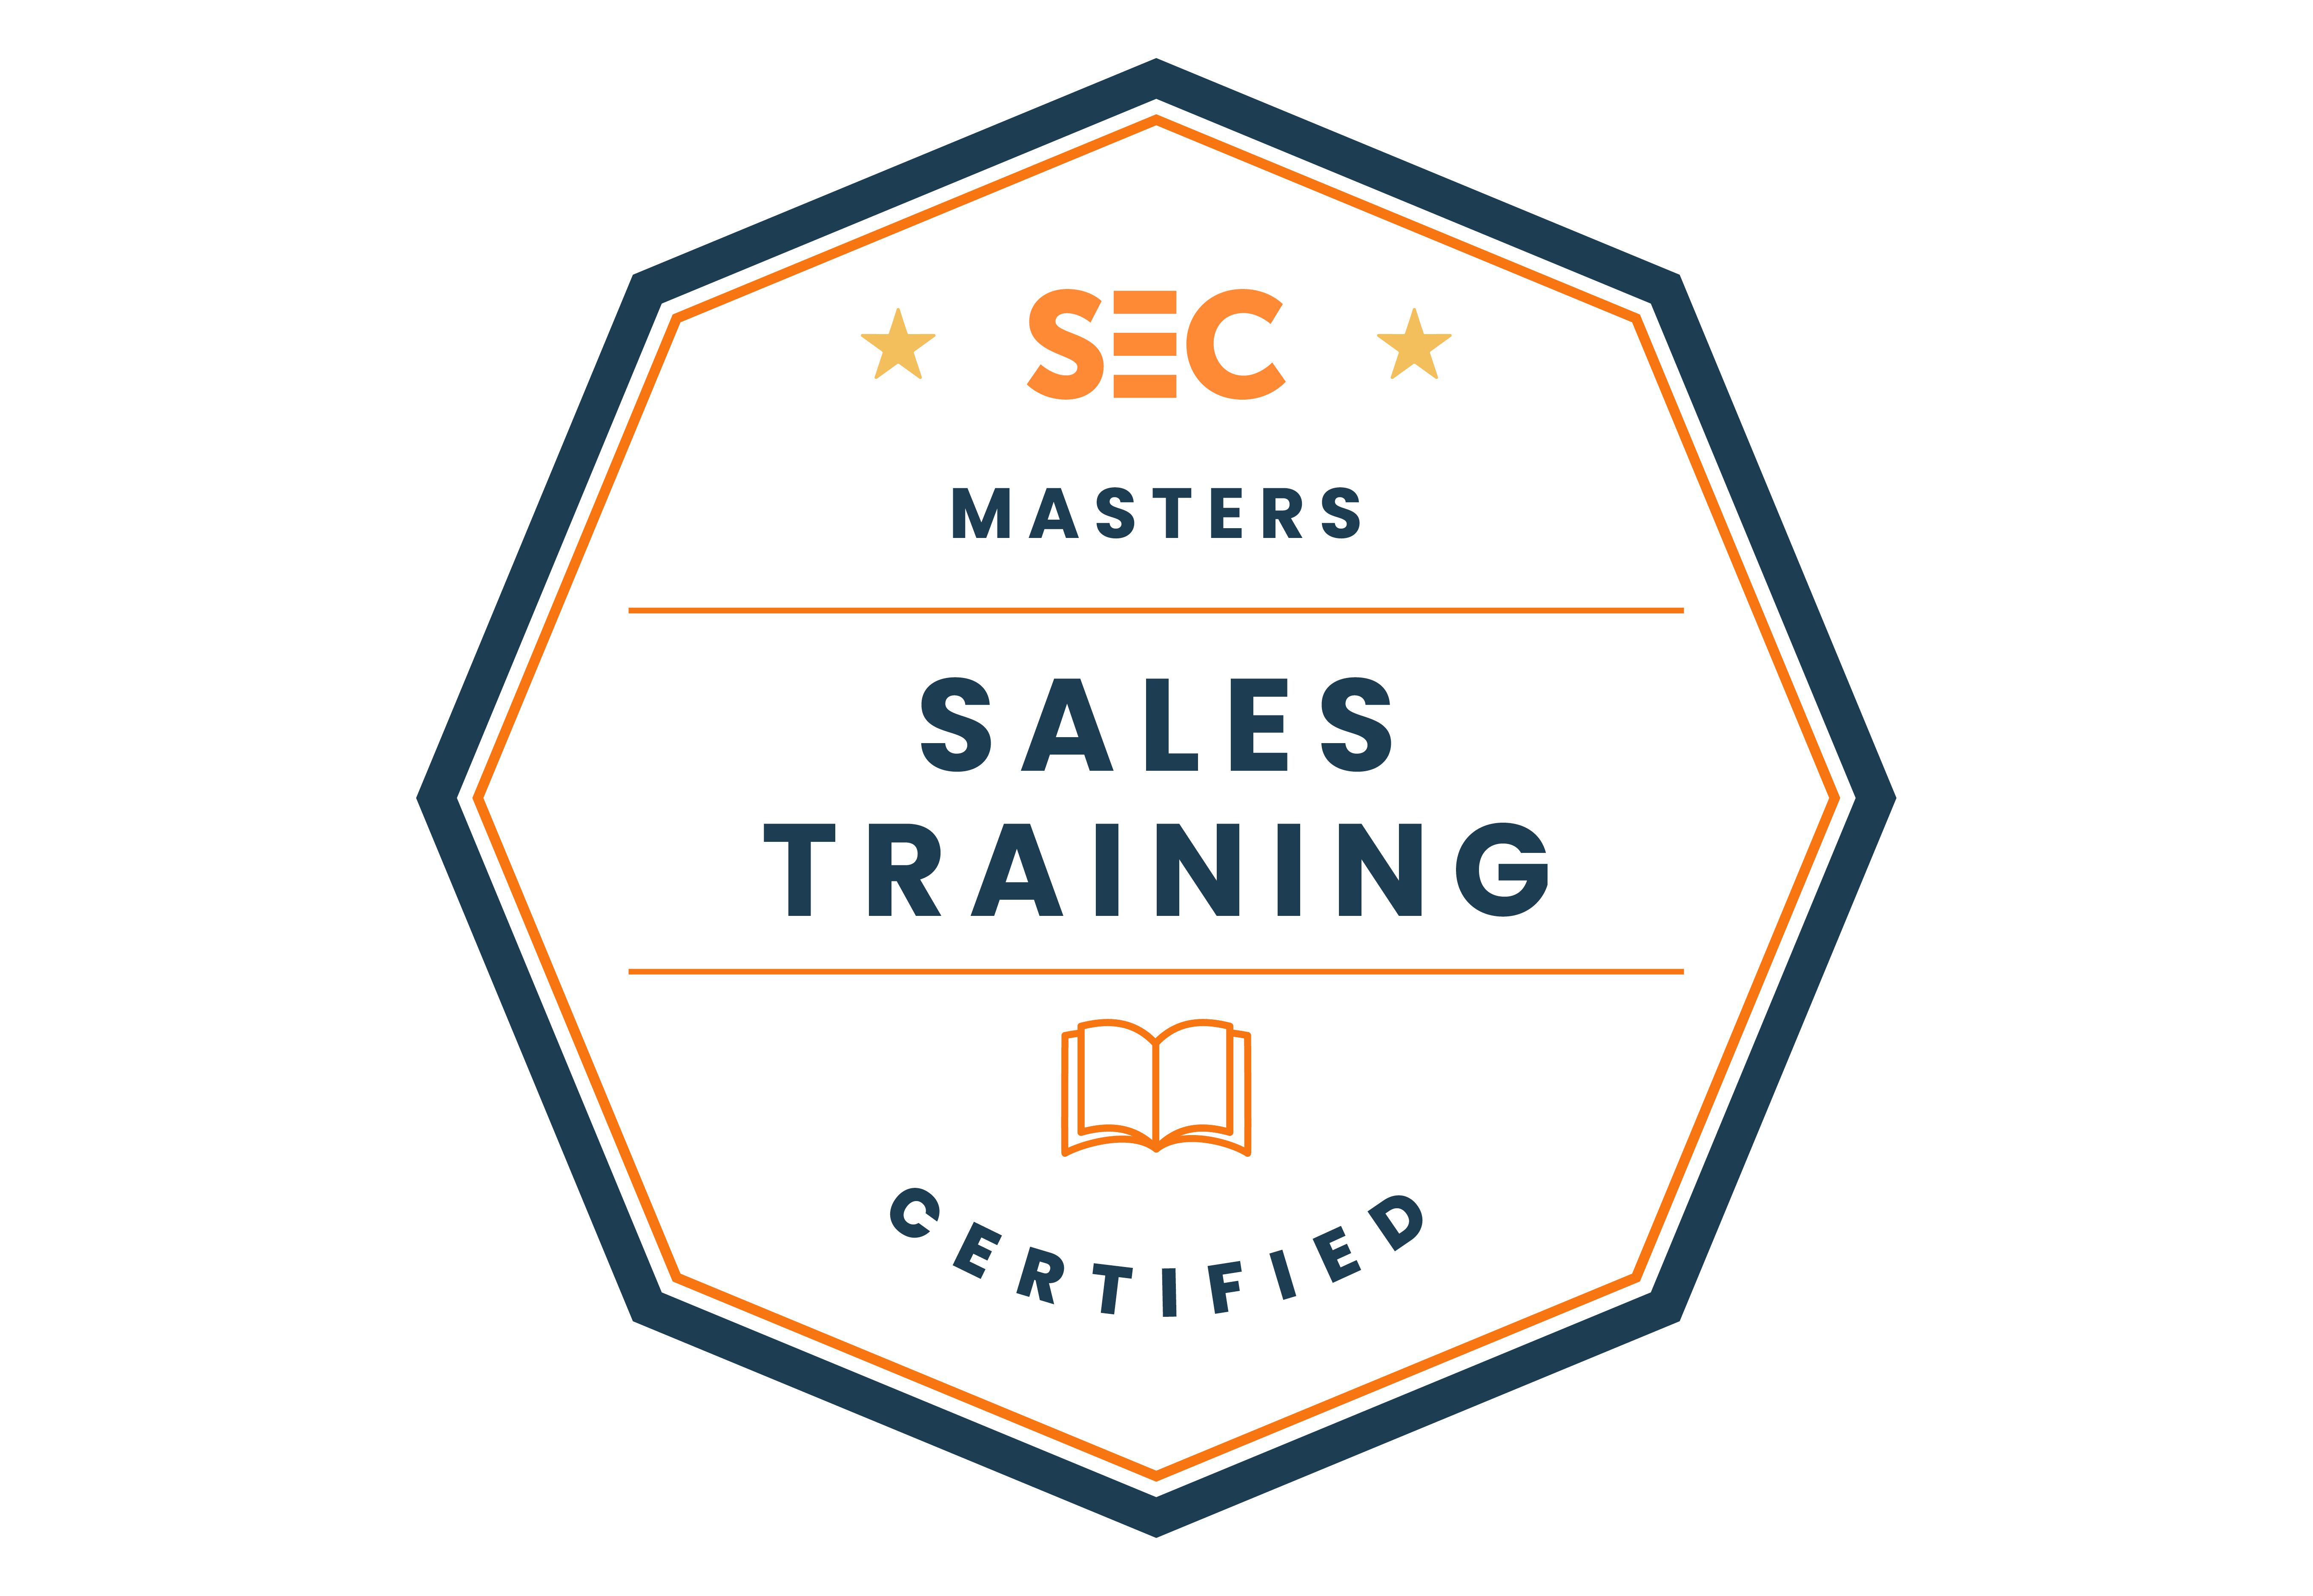 Sales Training Certified | Masters badge